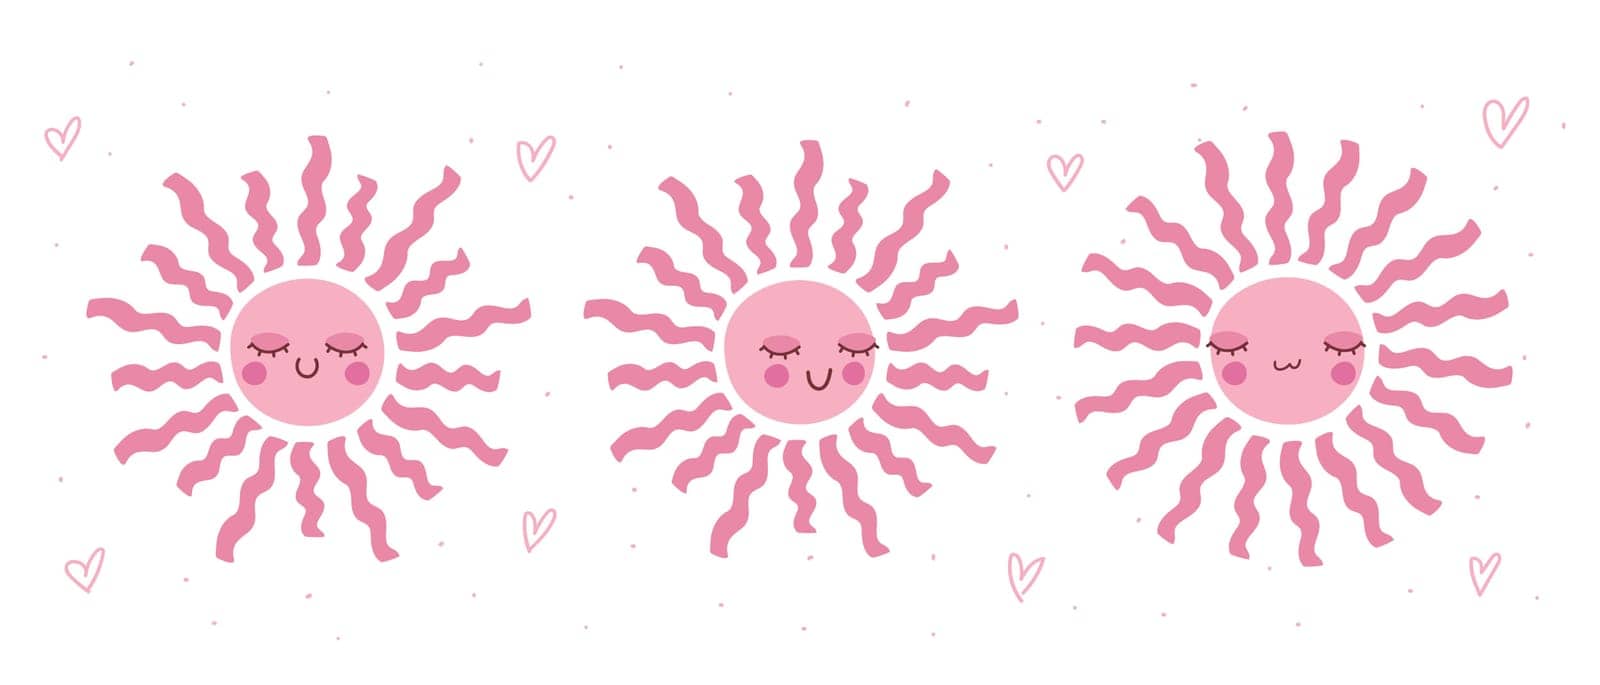 Cute hand drawn smiling suns set. Scandinavian style decoration for nursery kids room. Vector illustration  by psychoche